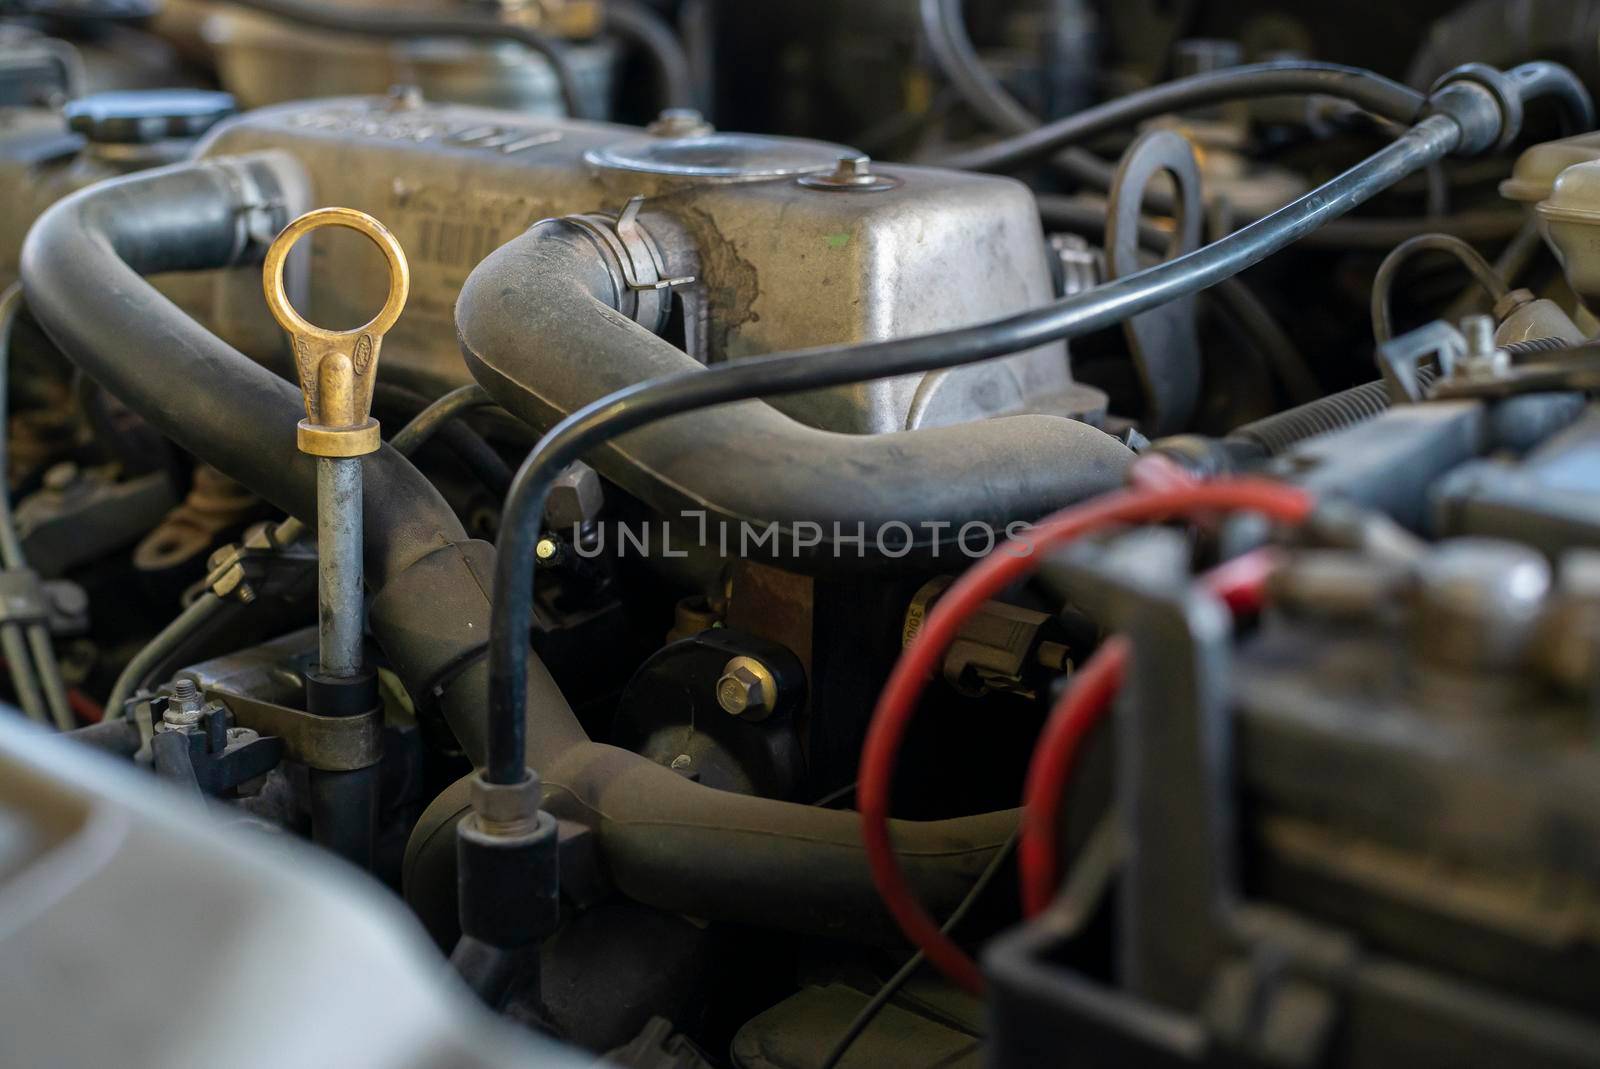 Detail of a used engine with mechanical parts on view inside a car